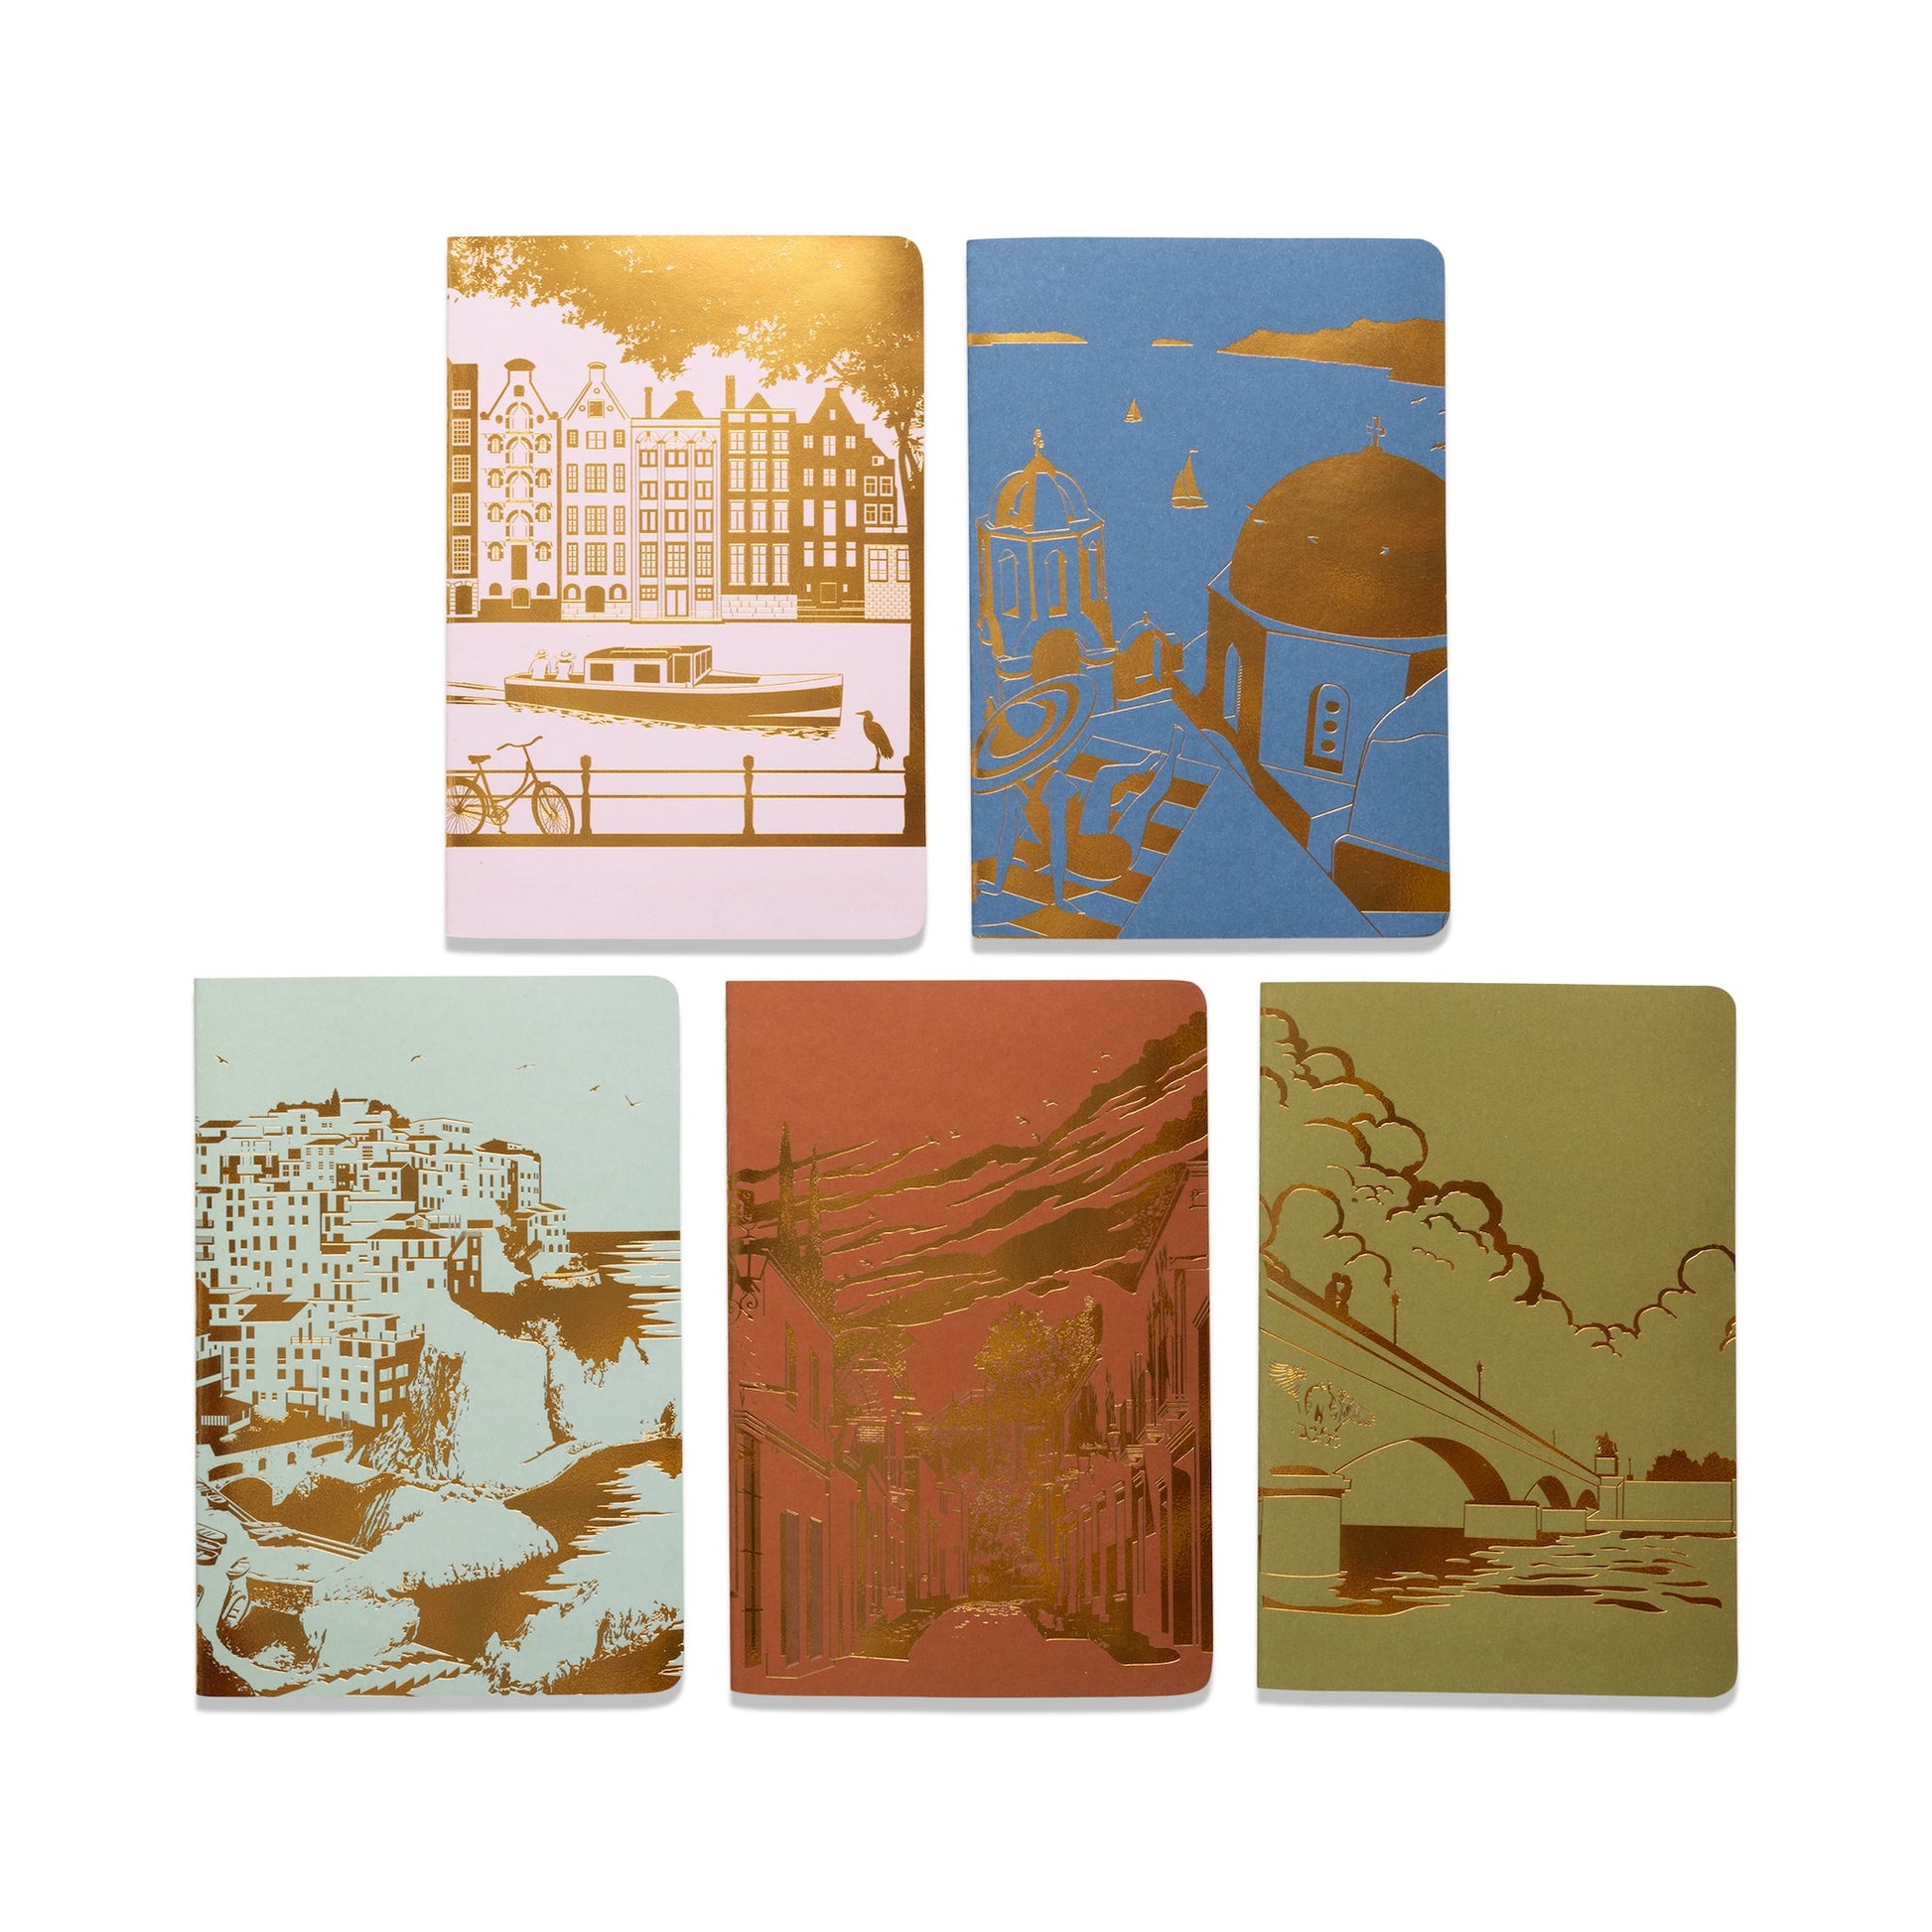 Travel Notebook Set - Anderson Design - 5 notebooks with scenic designs in gold emboss